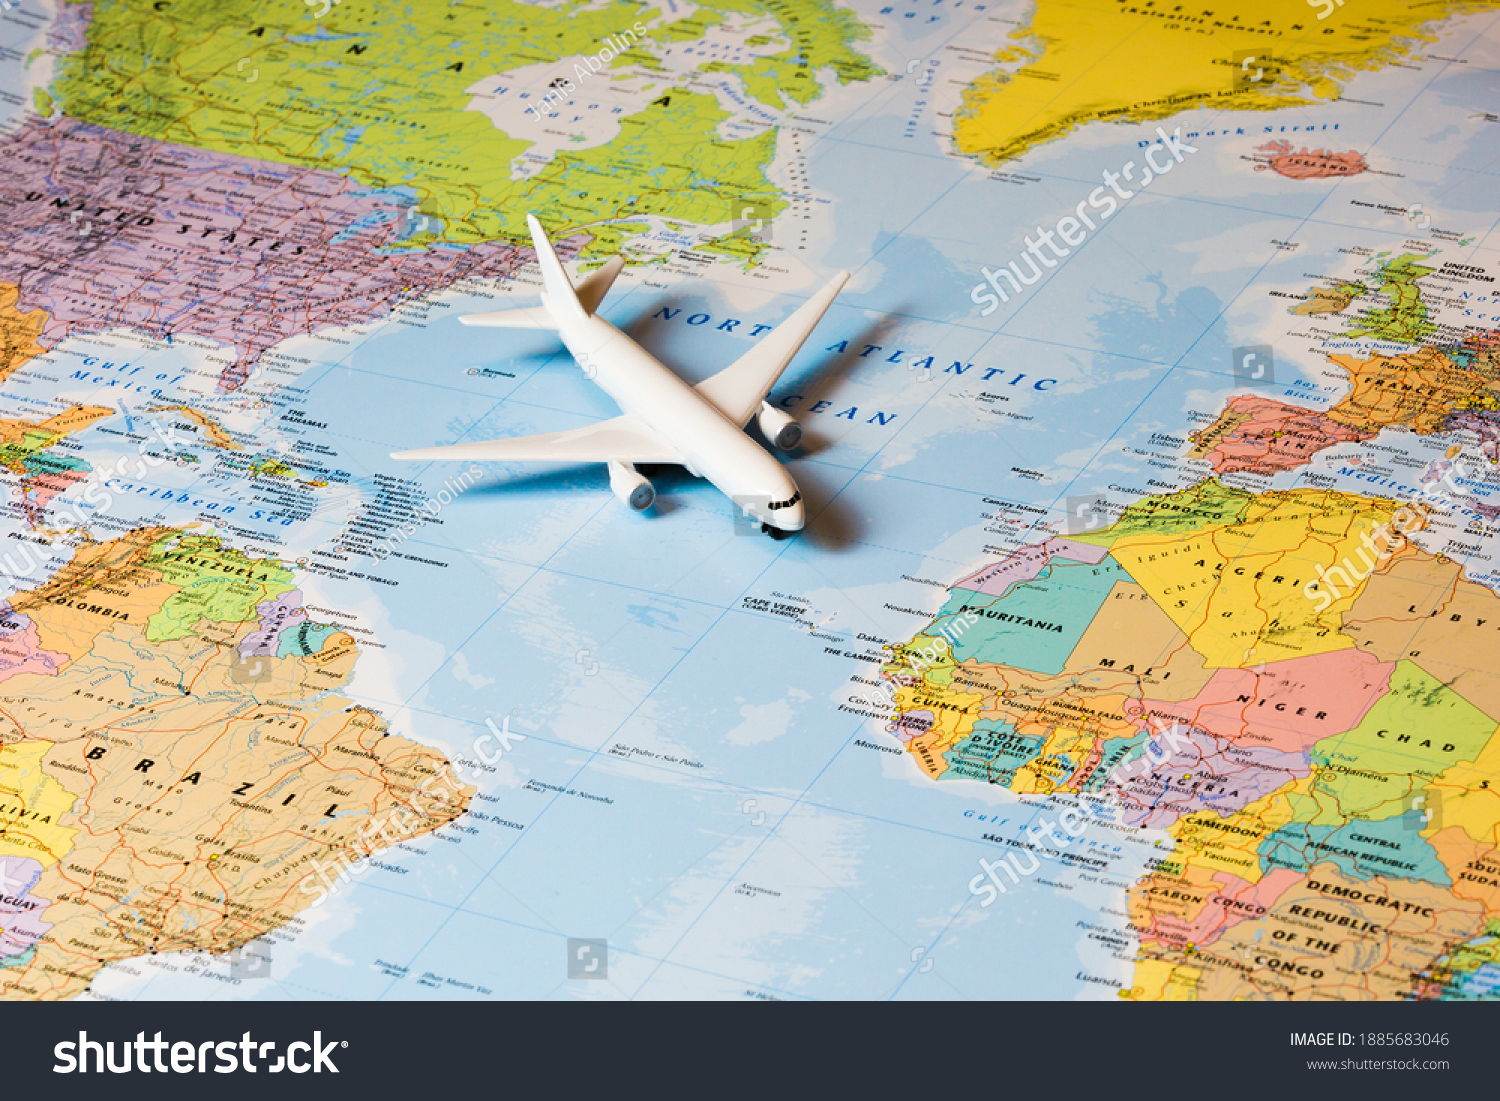 Travel the world. Travelling by plane. Airplane on a world map. #1885683046